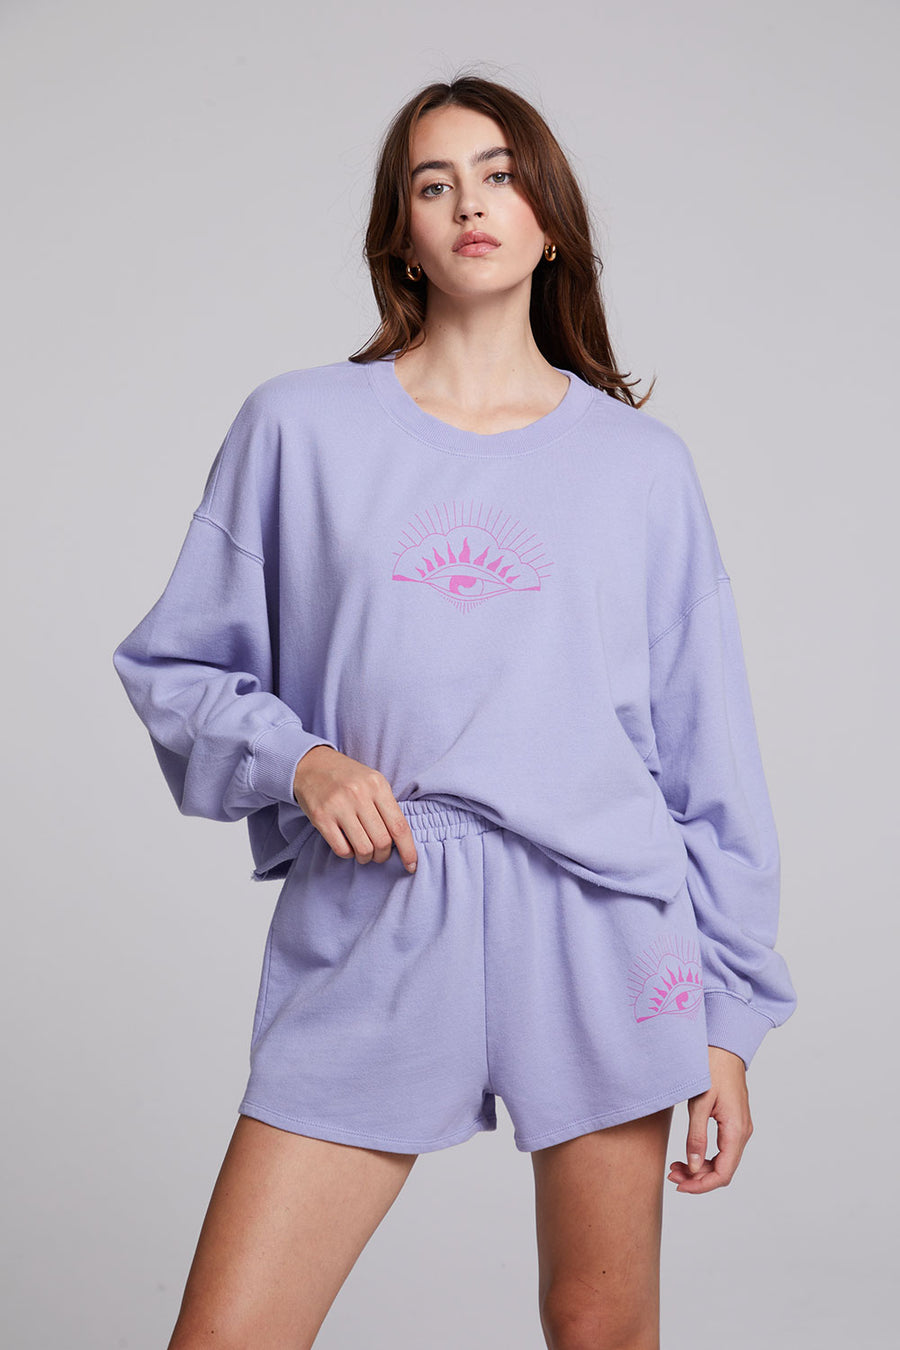 High Road Zodiac Pullover WOMENS chaserbrand